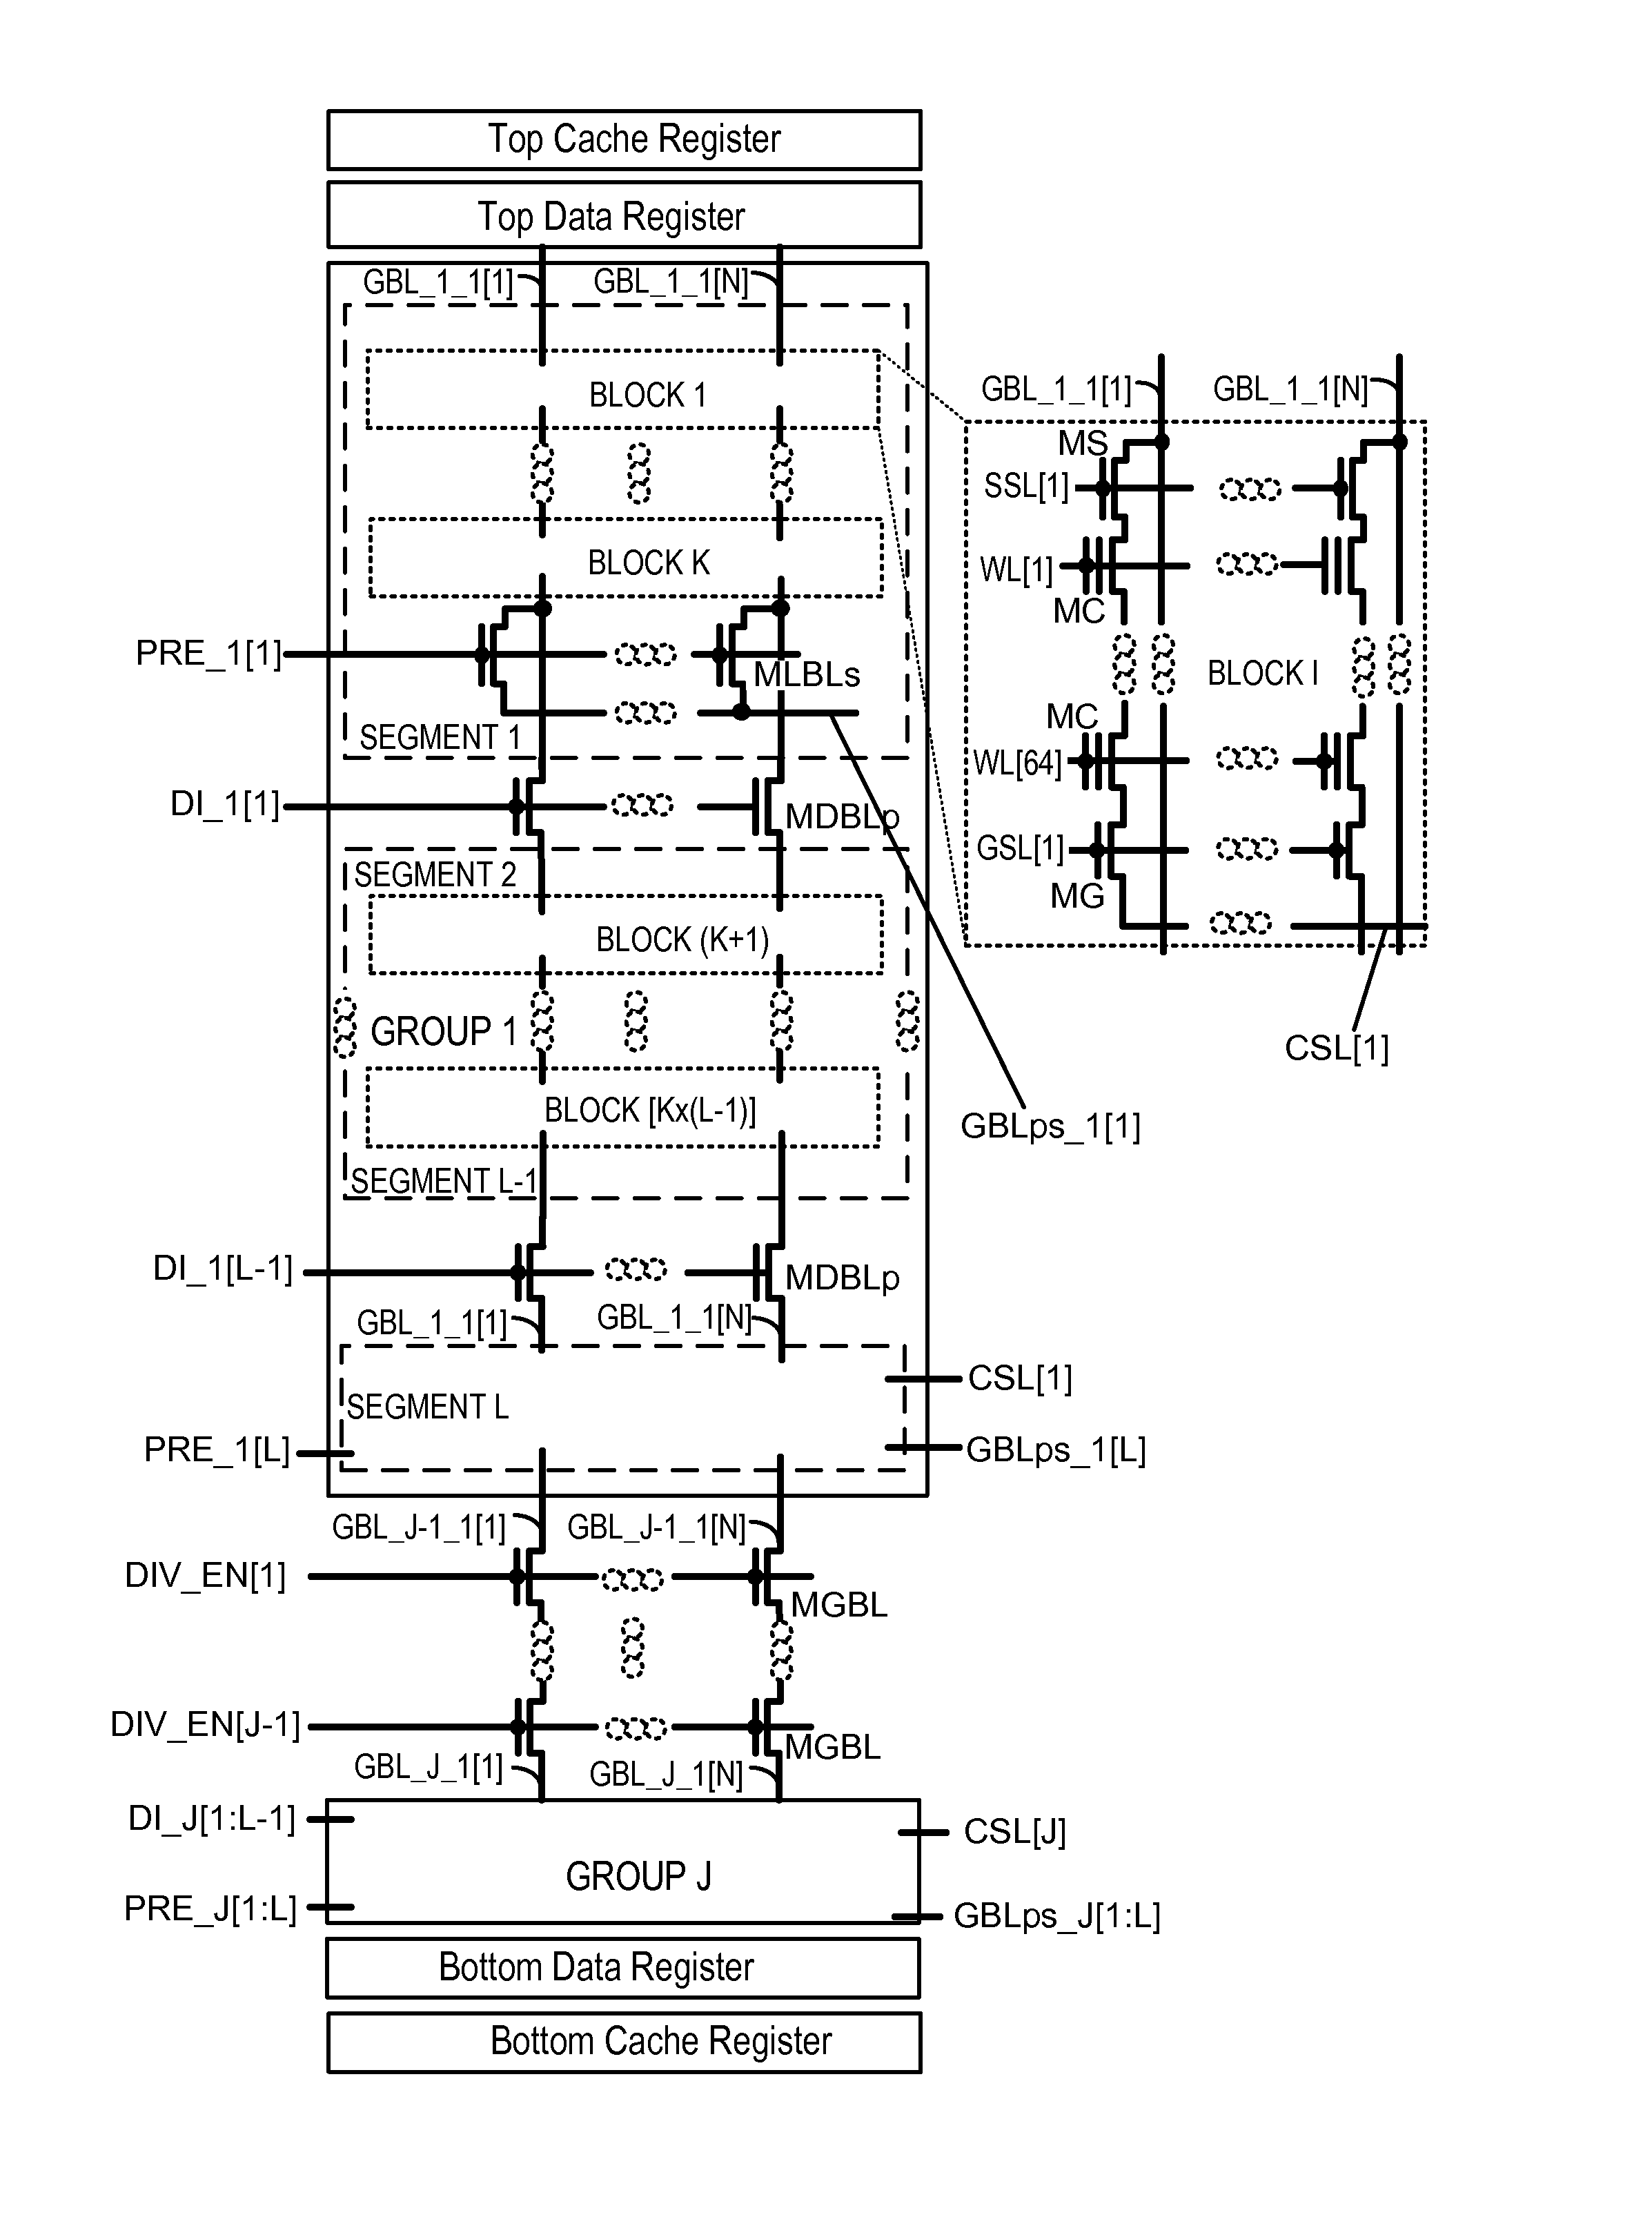 NAND array hiarchical bl structures for multiple-wl  and all-bl simultaneous erase, erase-verify, program, program-verify, and read operations